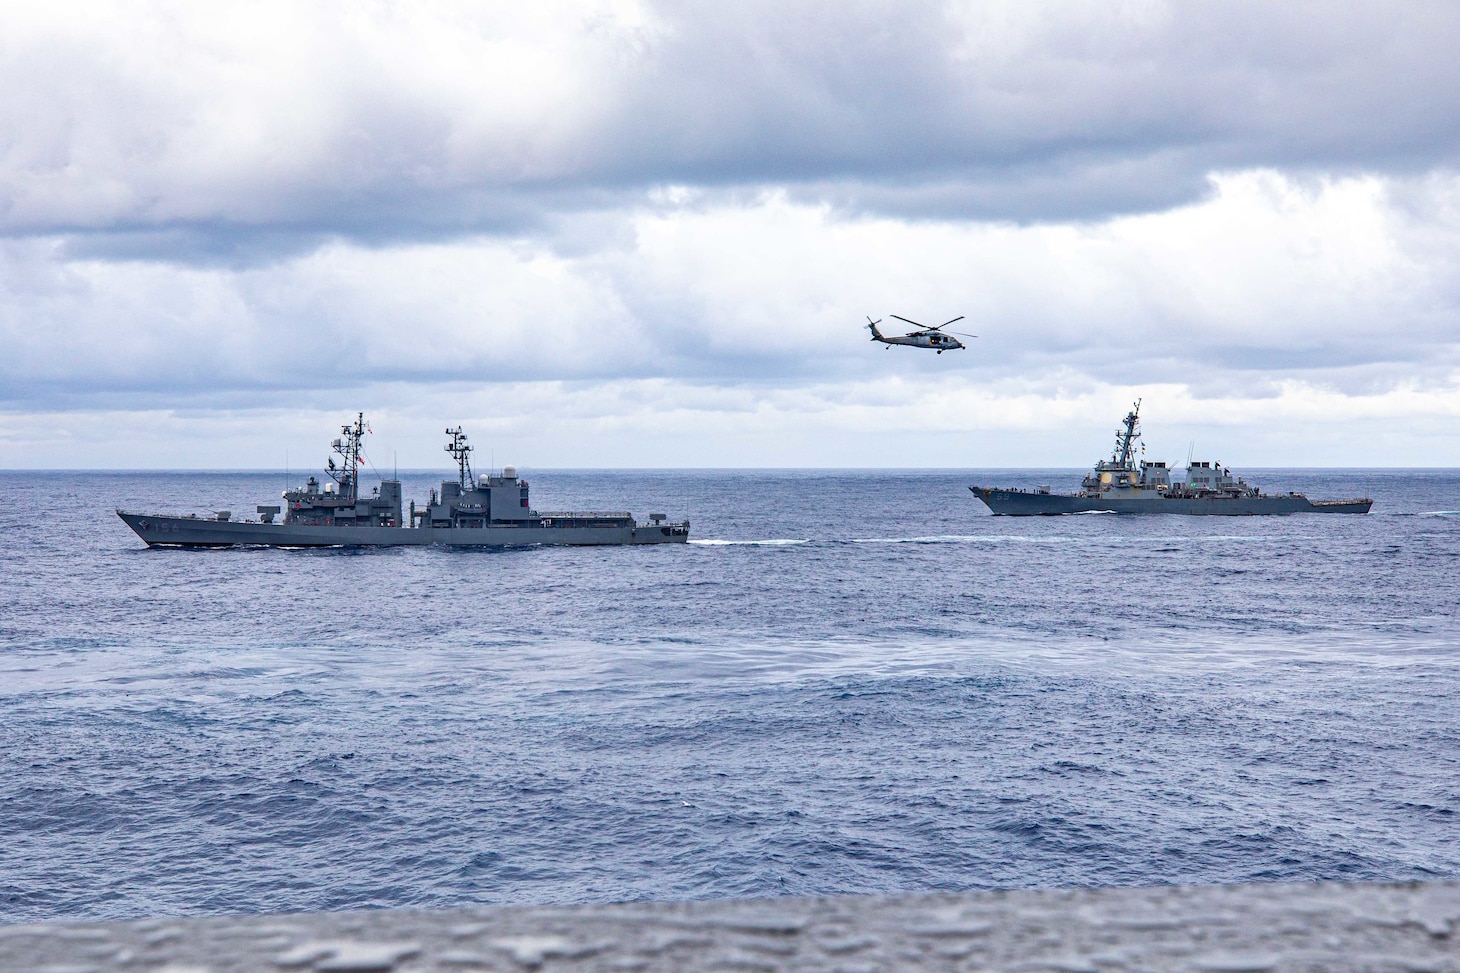 PHILIPPINE SEA (Nov. 20, 2022) USS Chancellorsville (CG 62) along with Carrier Strike Group (CSG) 5 units conduct tri-lateral operations with JS Setogiri (DD 156) of the Japan Maritime Self-Defense Force (JMSDF) and HMAS Stalwart (A304) of the Royal Australian Navy, to focus on allied interoperability training in the areas of sustainment capability and high end warfighting in the Philippine Sea, Nov. 20. Chancellorsville is forward-deployed to the U.S. 7th Fleet in support of security and stability in the Indo-Pacific and is assigned to Commander, Task Force 70, a combat-ready force that protects and defends the collective maritime interest of its allies and partners in the region. (U.S. Navy photo by Mass Communication Specialist 2nd Class Justin Stack)